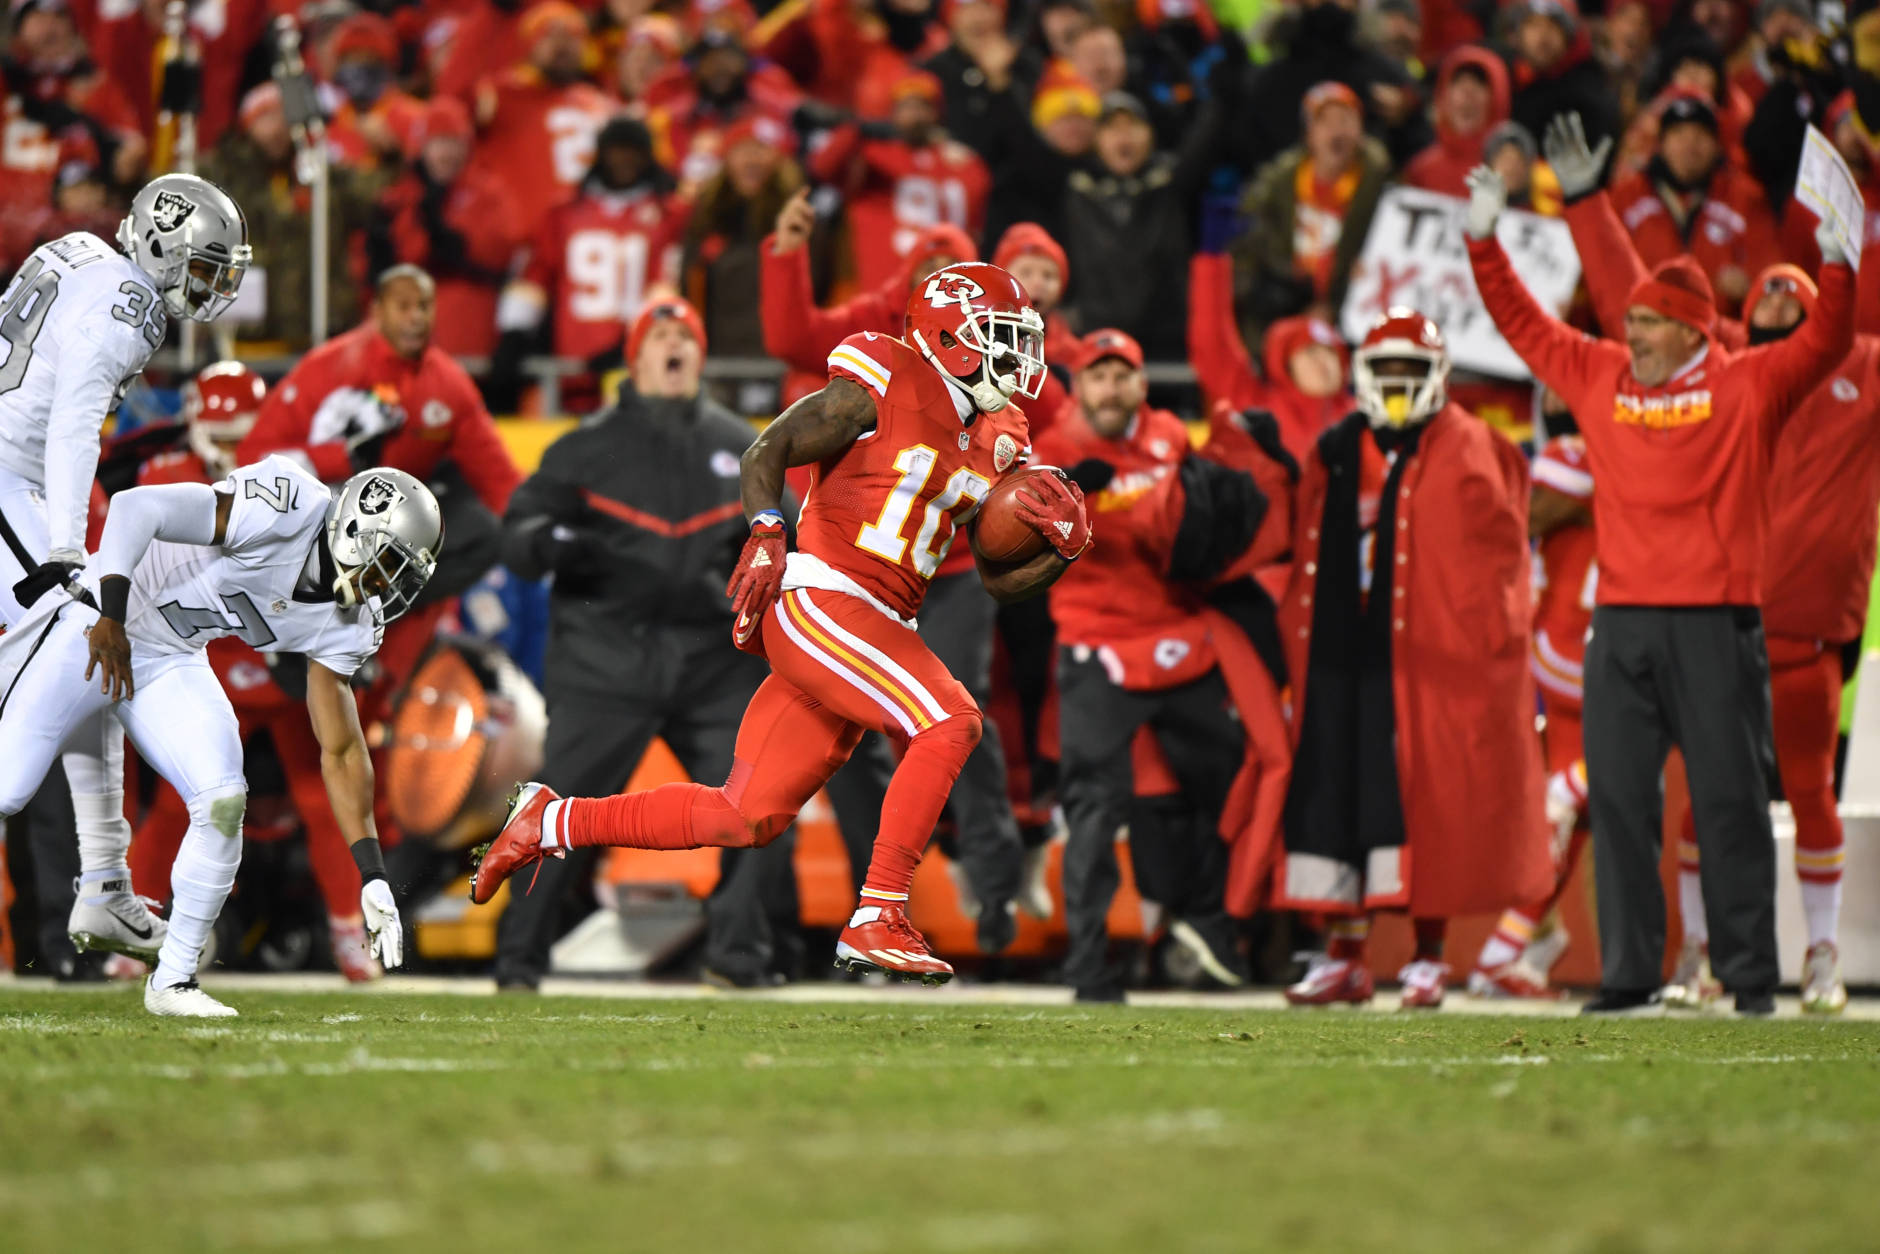 KANSAS CITY, MO - DECEMBER 8: Wide receiver Tyreek Hill #10 of the Kansas City Chiefs breaks beyond the Oakland Raiders last line of defense en route to a punt return touchdown at Arrowhead Stadium during the second quarter of the game on December 8, 2016 in Kansas City, Missouri. (Photo by Peter Aiken/Getty Images)